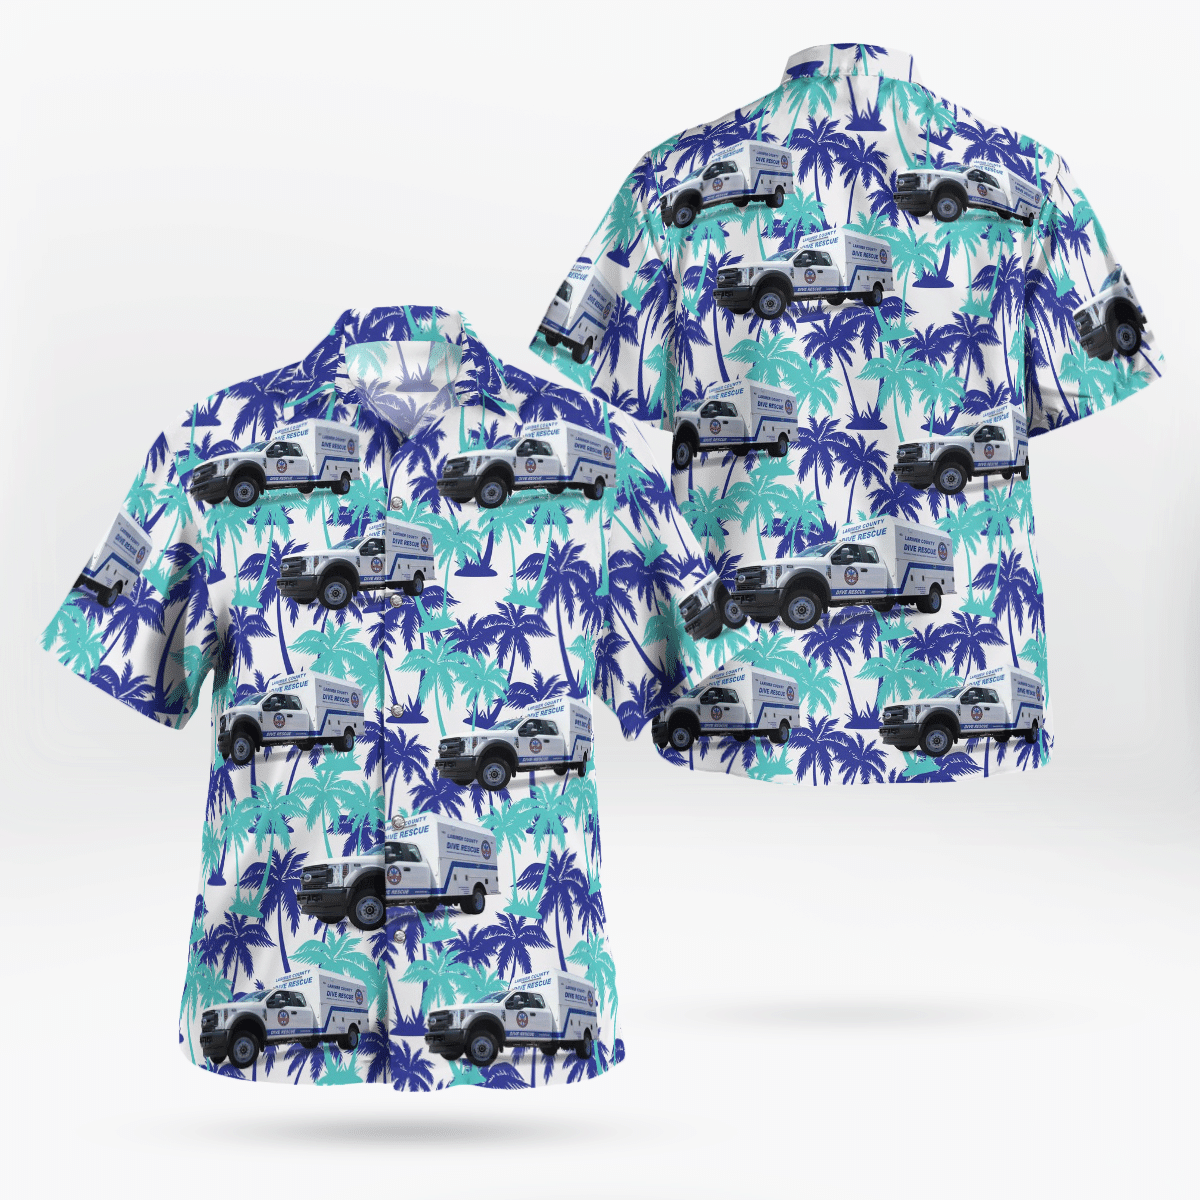 Shop now to find the perfect Hawaii Shirt for your hobby 27